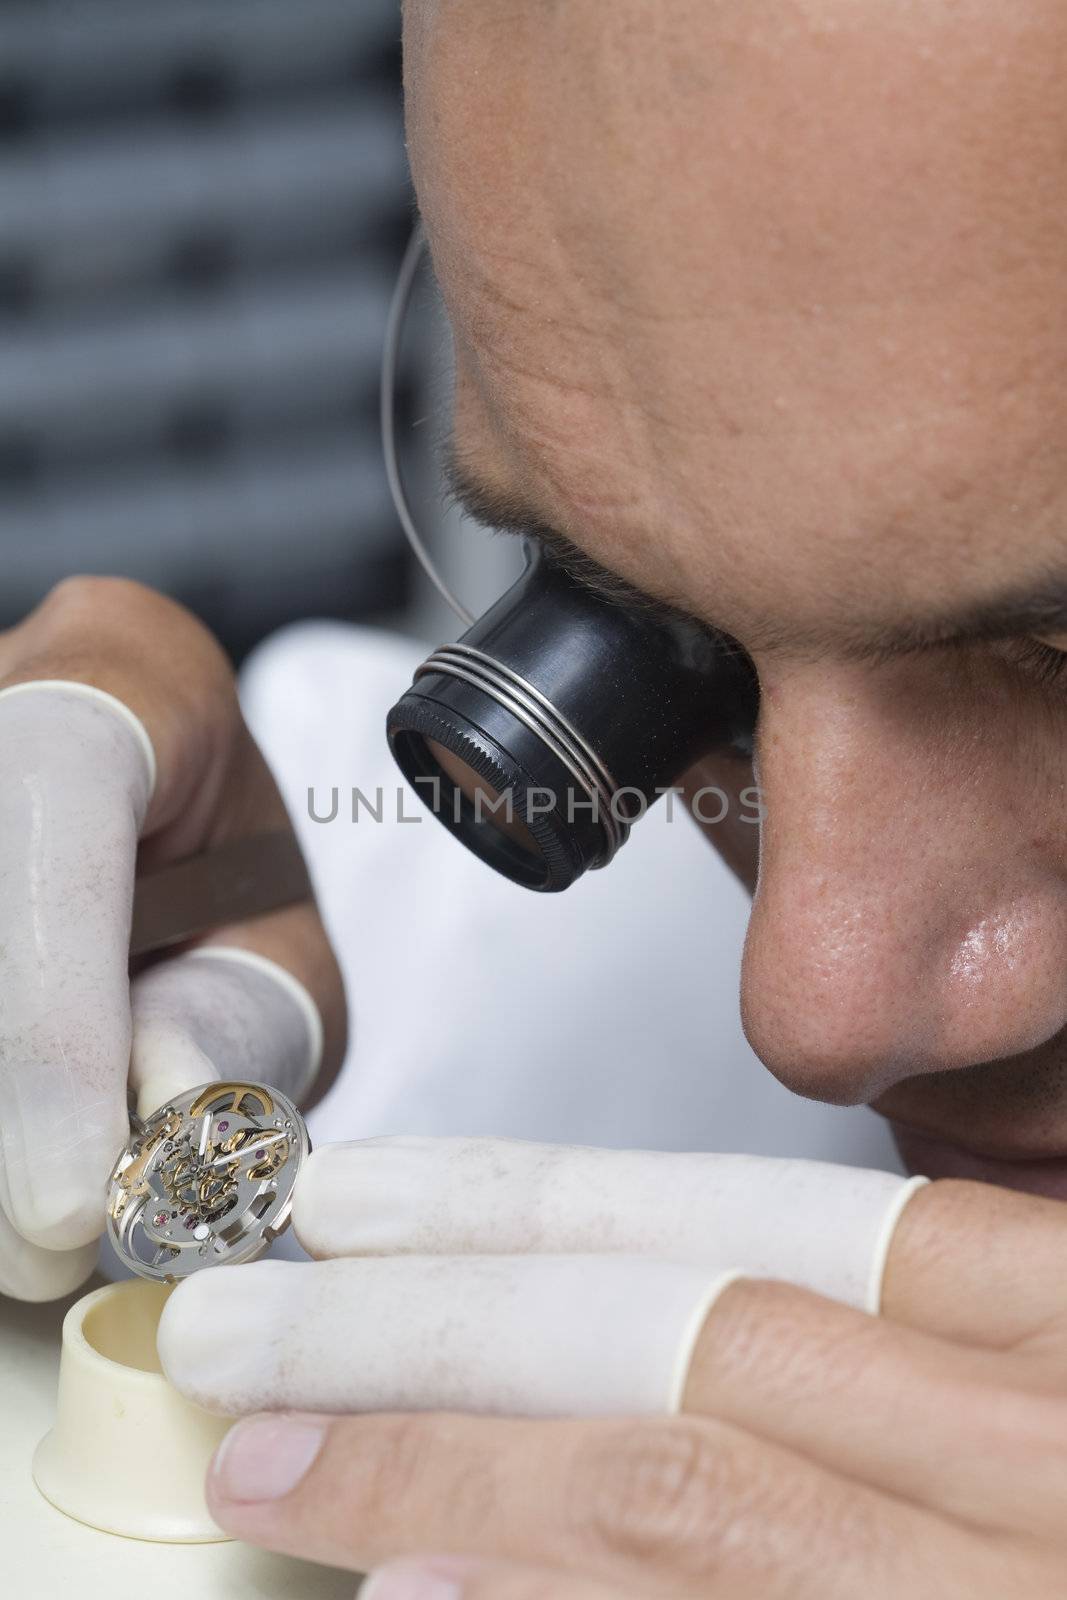 A watchmaker or repair man in action, viewing very closely a swiss watch.